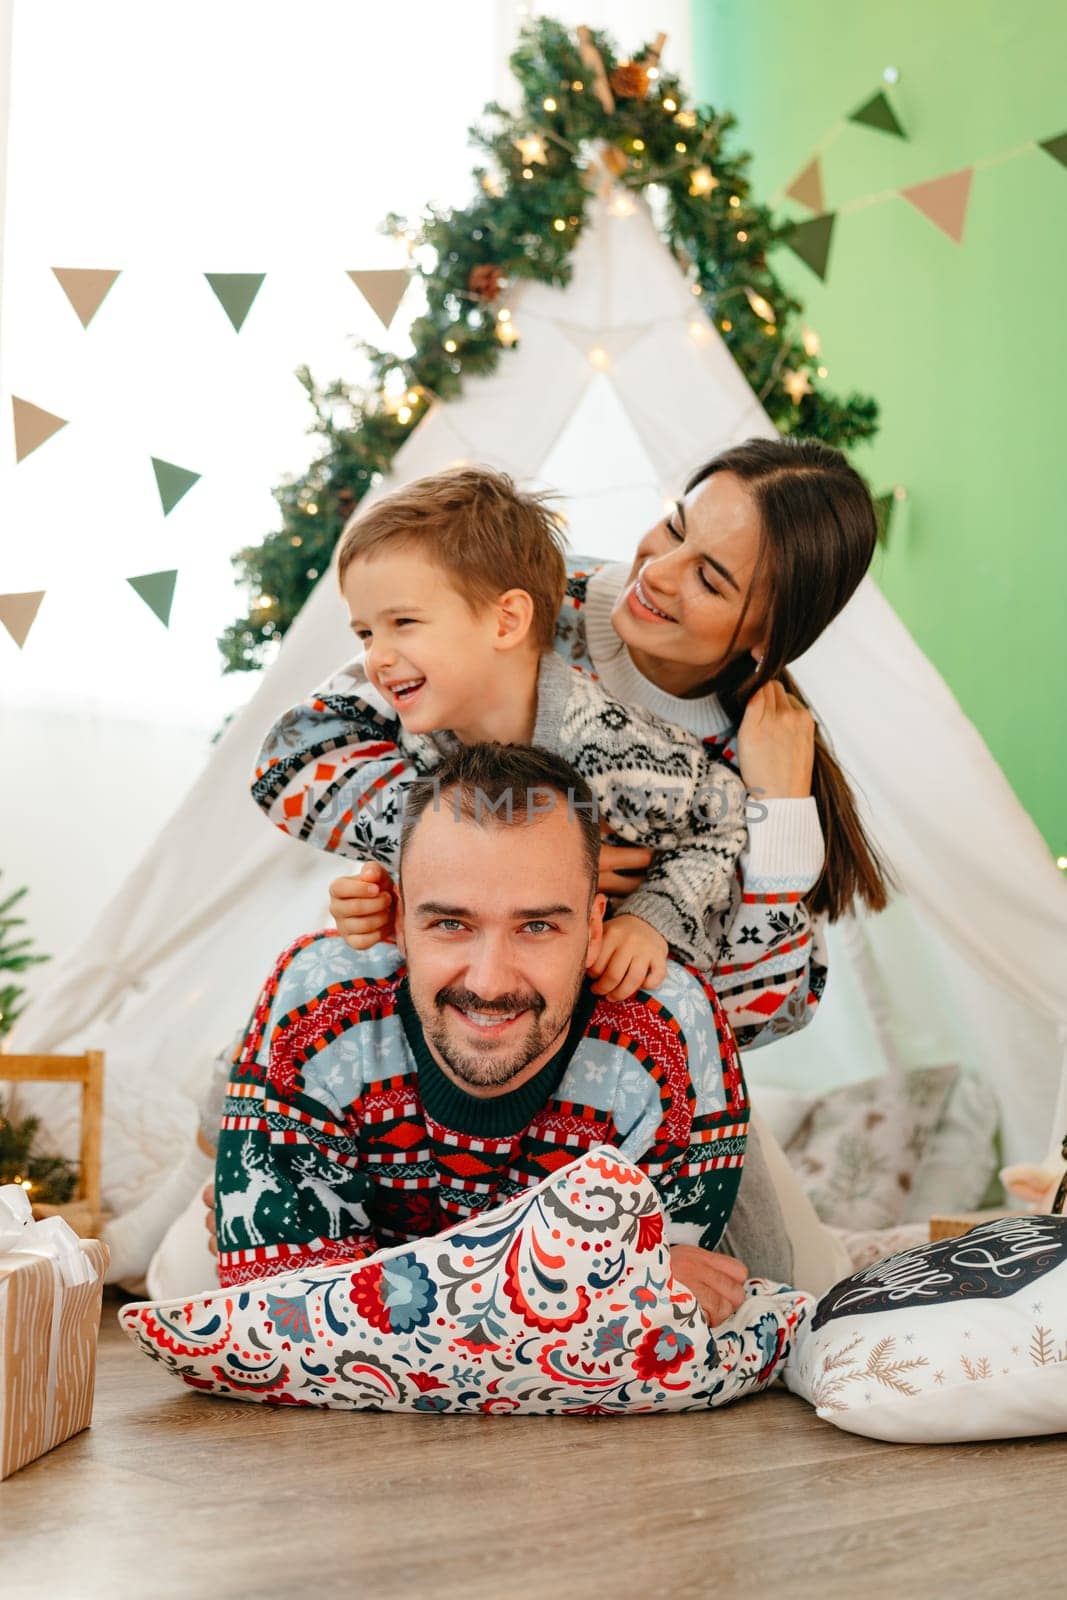 Happy parents play with their little son in a teepee during Christmas holidays by Fabrikasimf